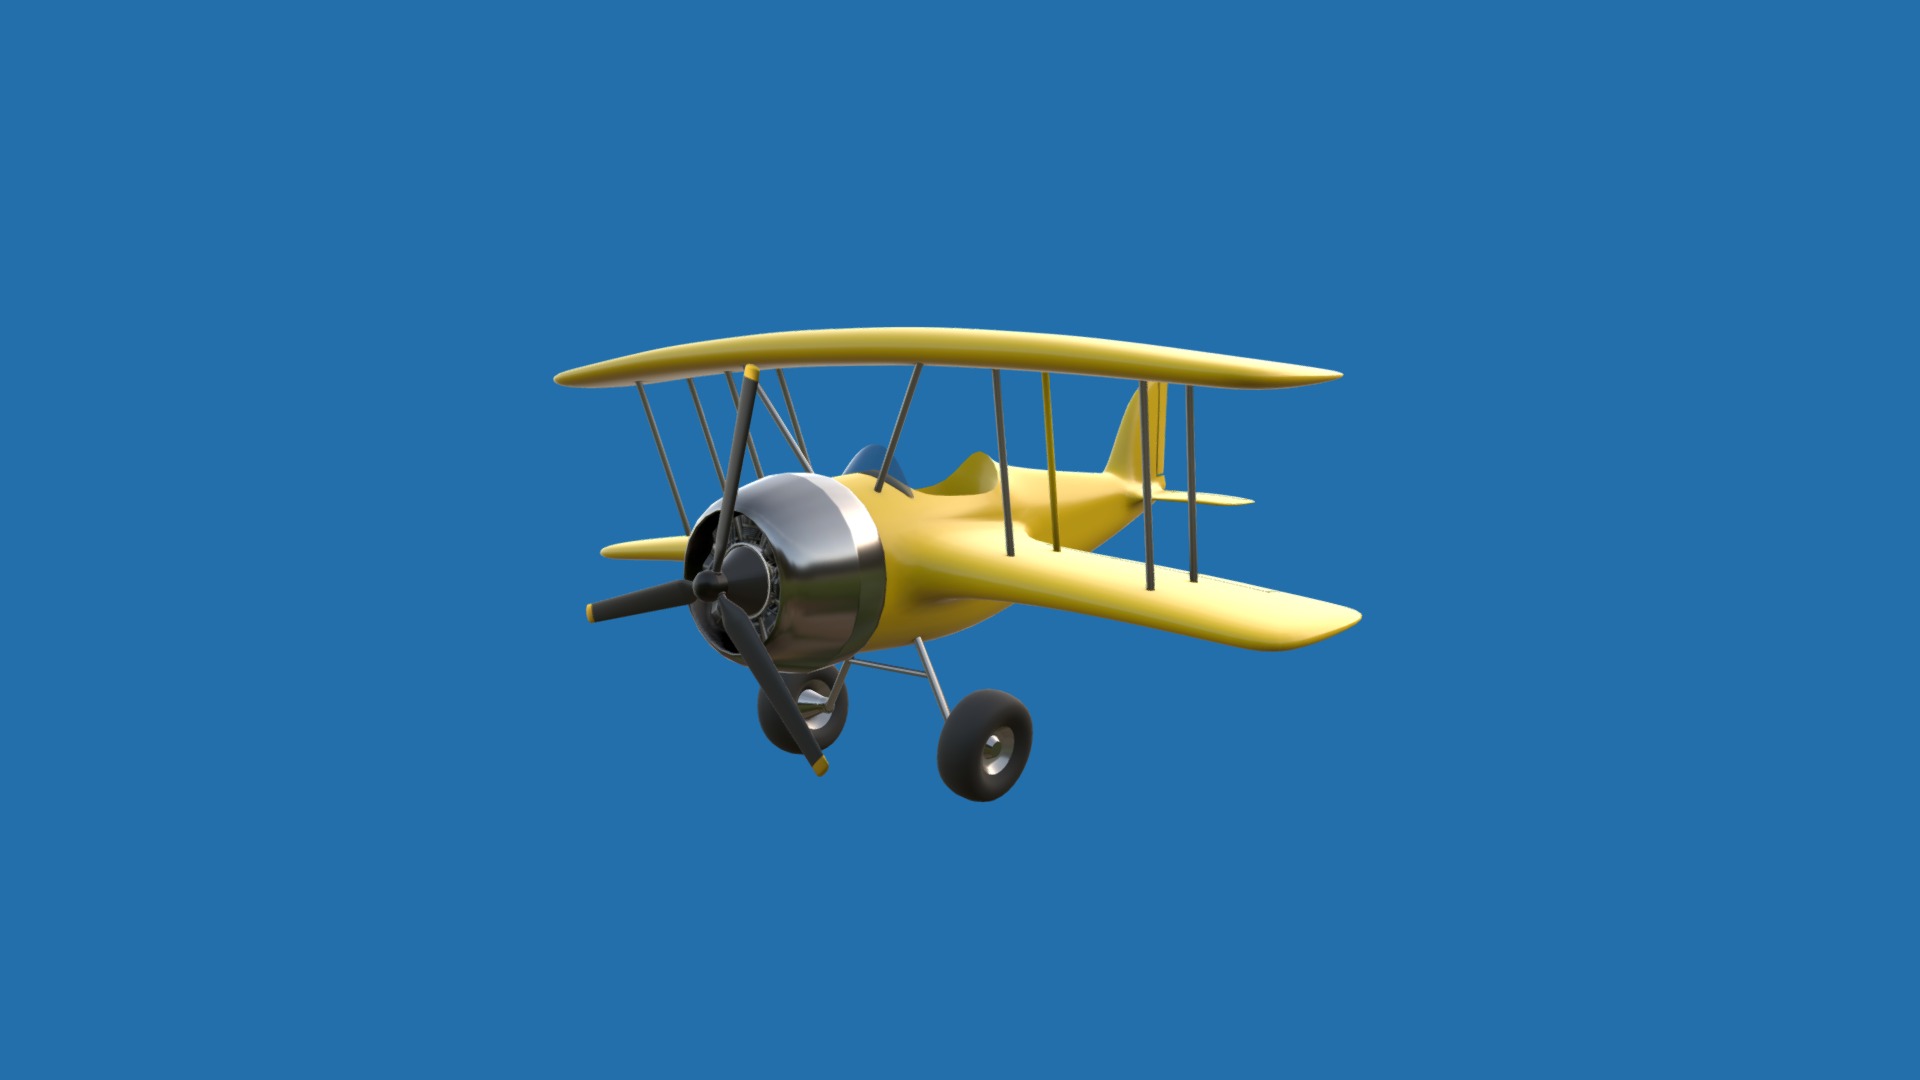 3D model Toy Airplane - This is a 3D model of the Toy Airplane. The 3D model is about a yellow helicopter in the sky.